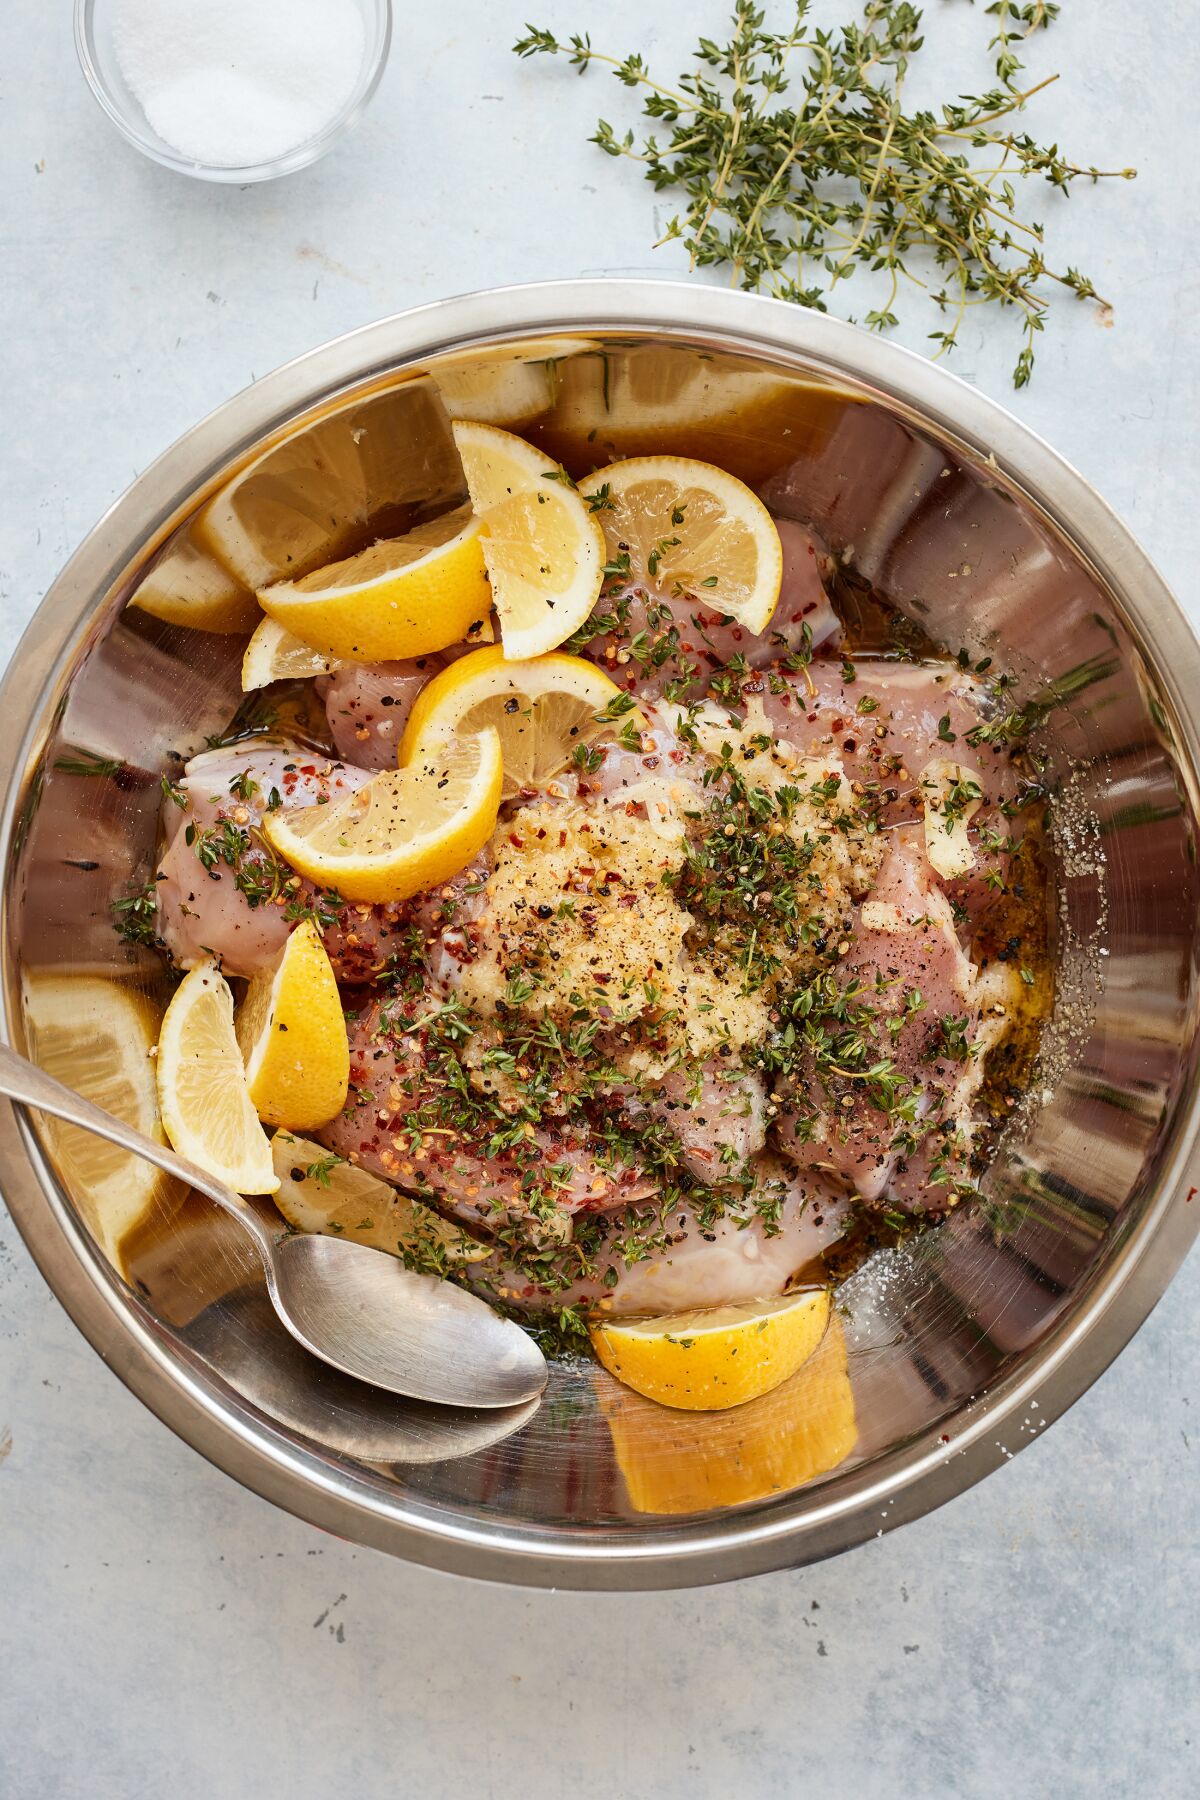 Raw chicken pieces are tossed in a large bowl with lemon, herbs and aromatics.